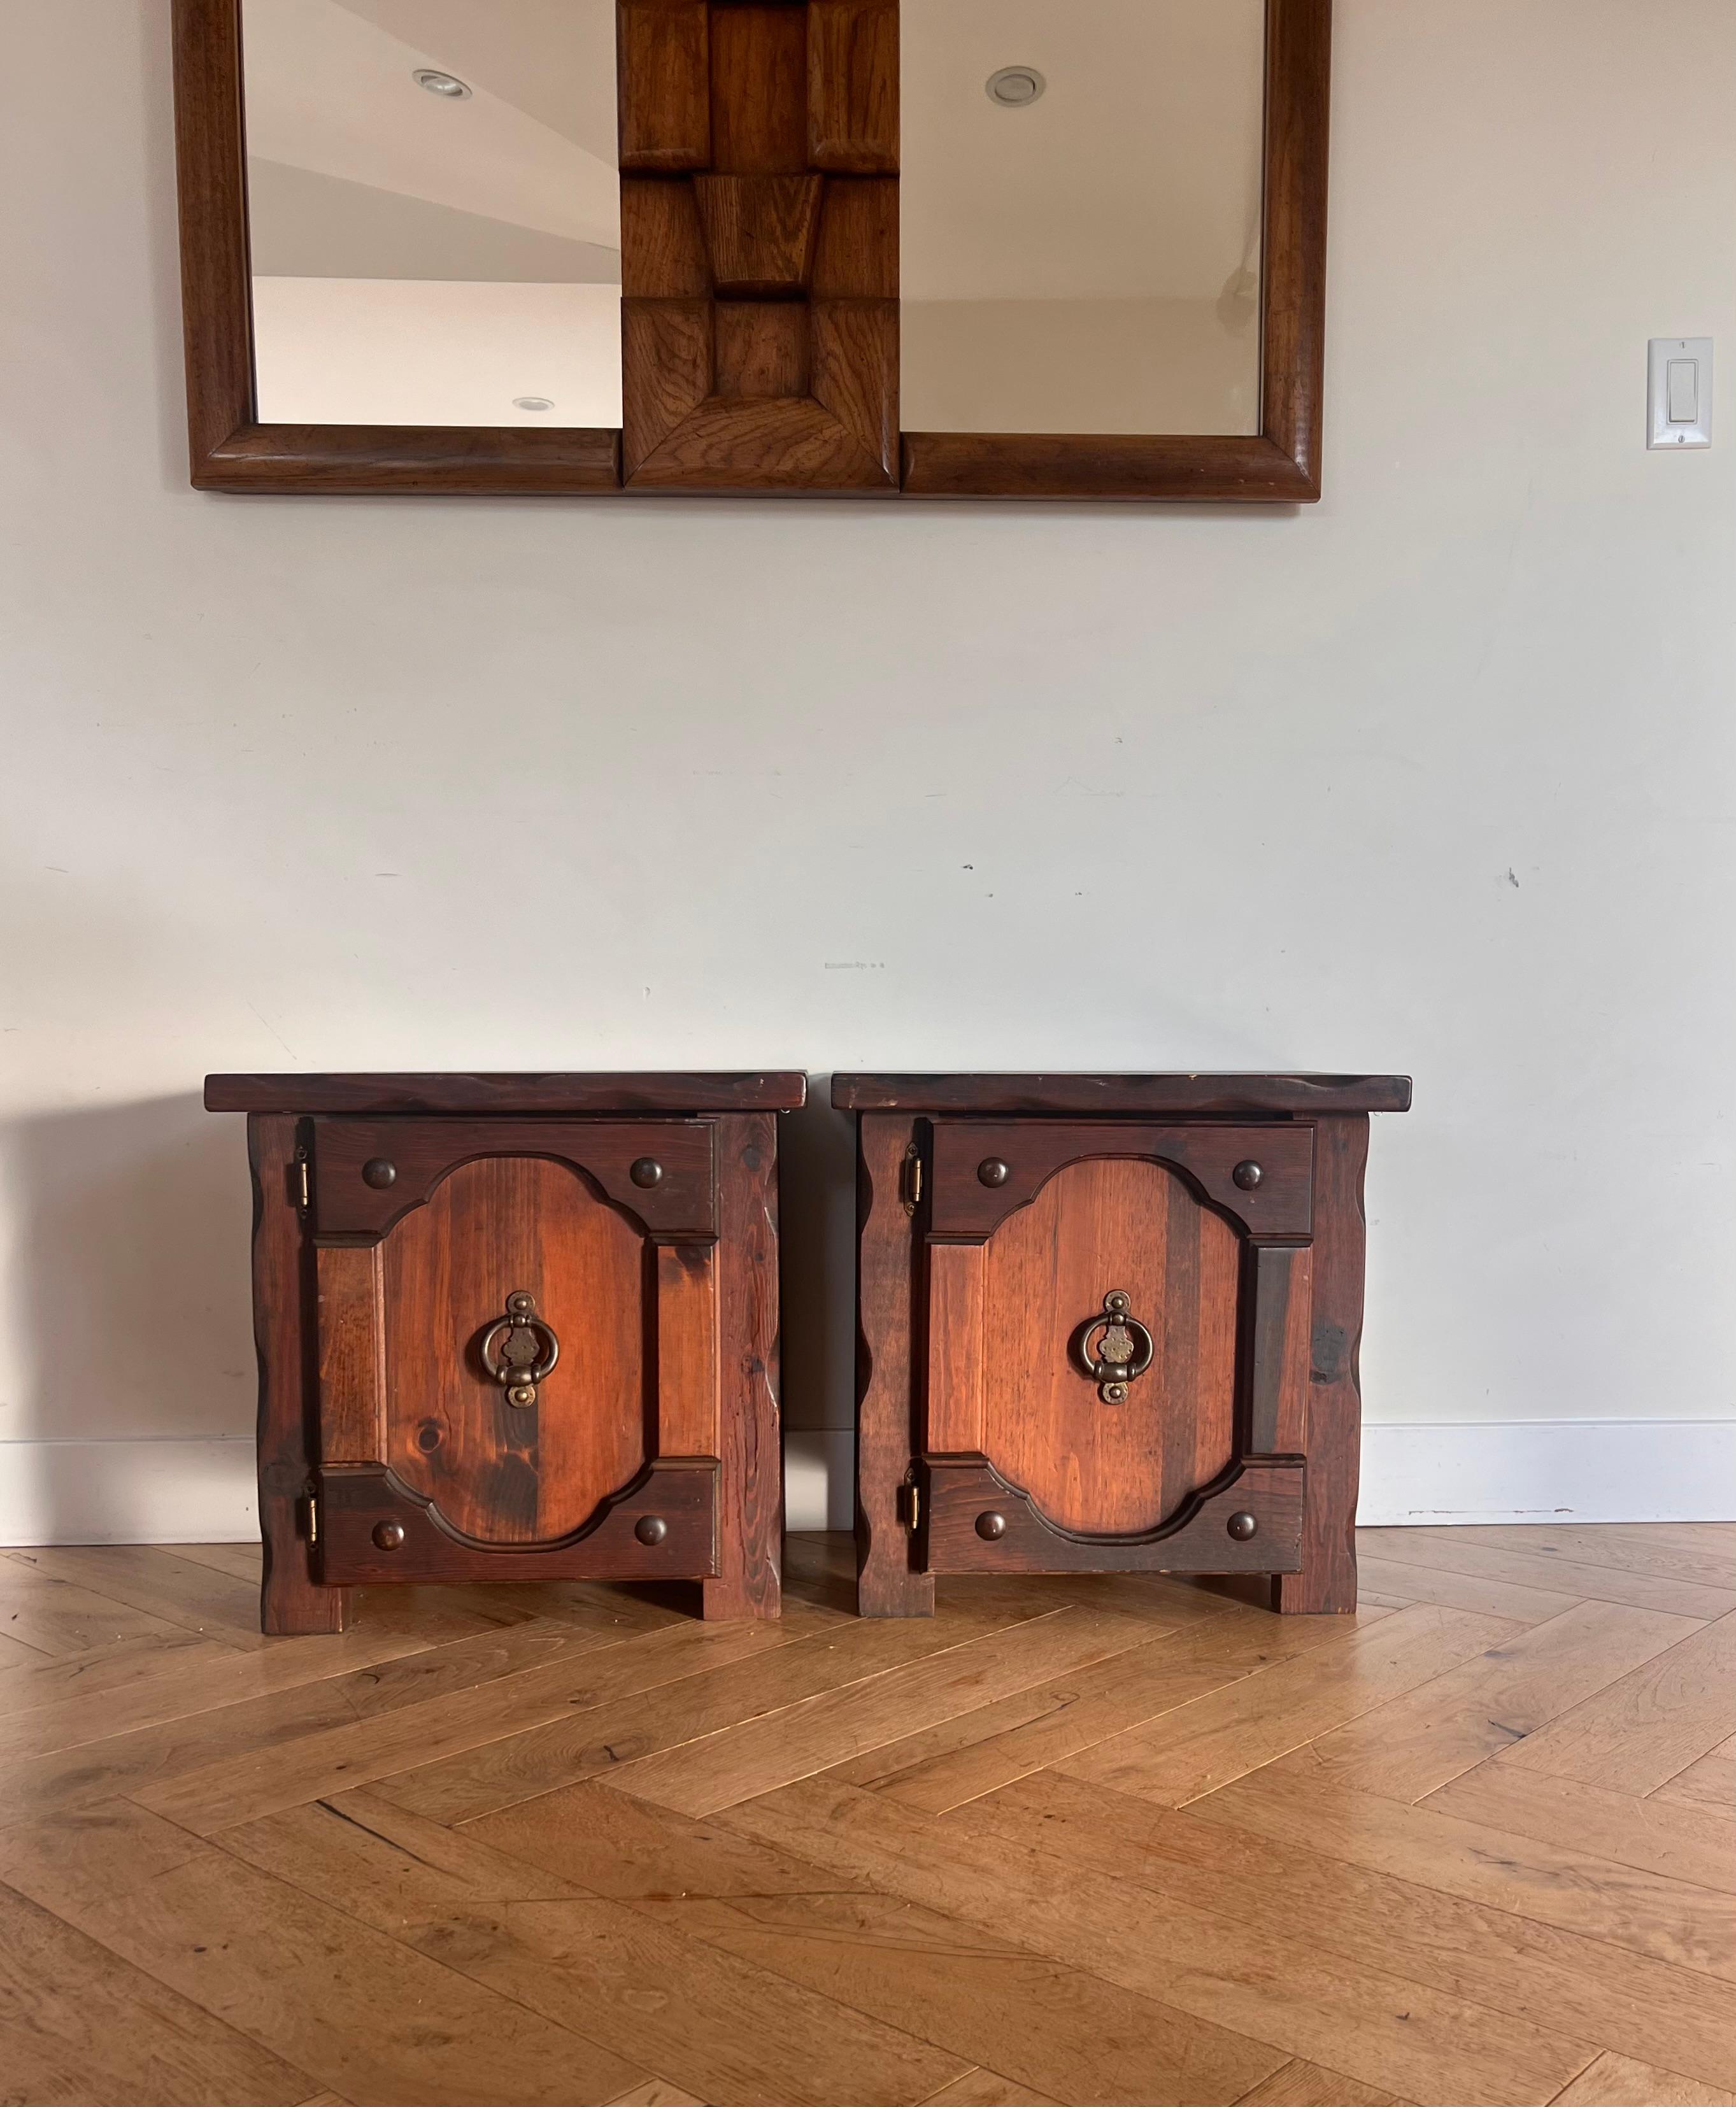 Unknown Mission craftsman gothic wooden nightstands with iron hardware, circa 1970 For Sale